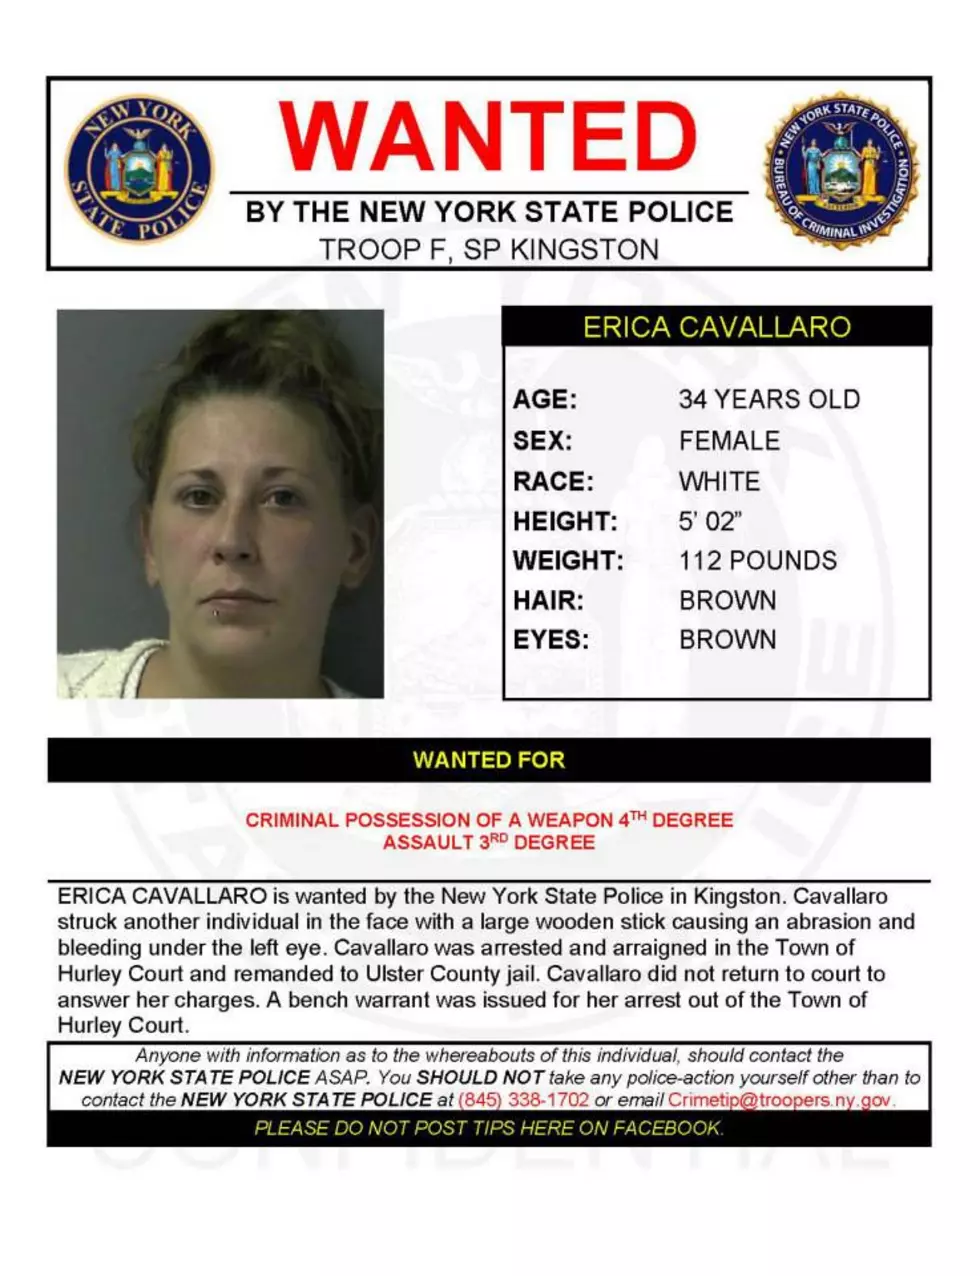 Warrant Wednesday: Ulster County Woman Wanted for Criminal Possession of a Weapon and Assault